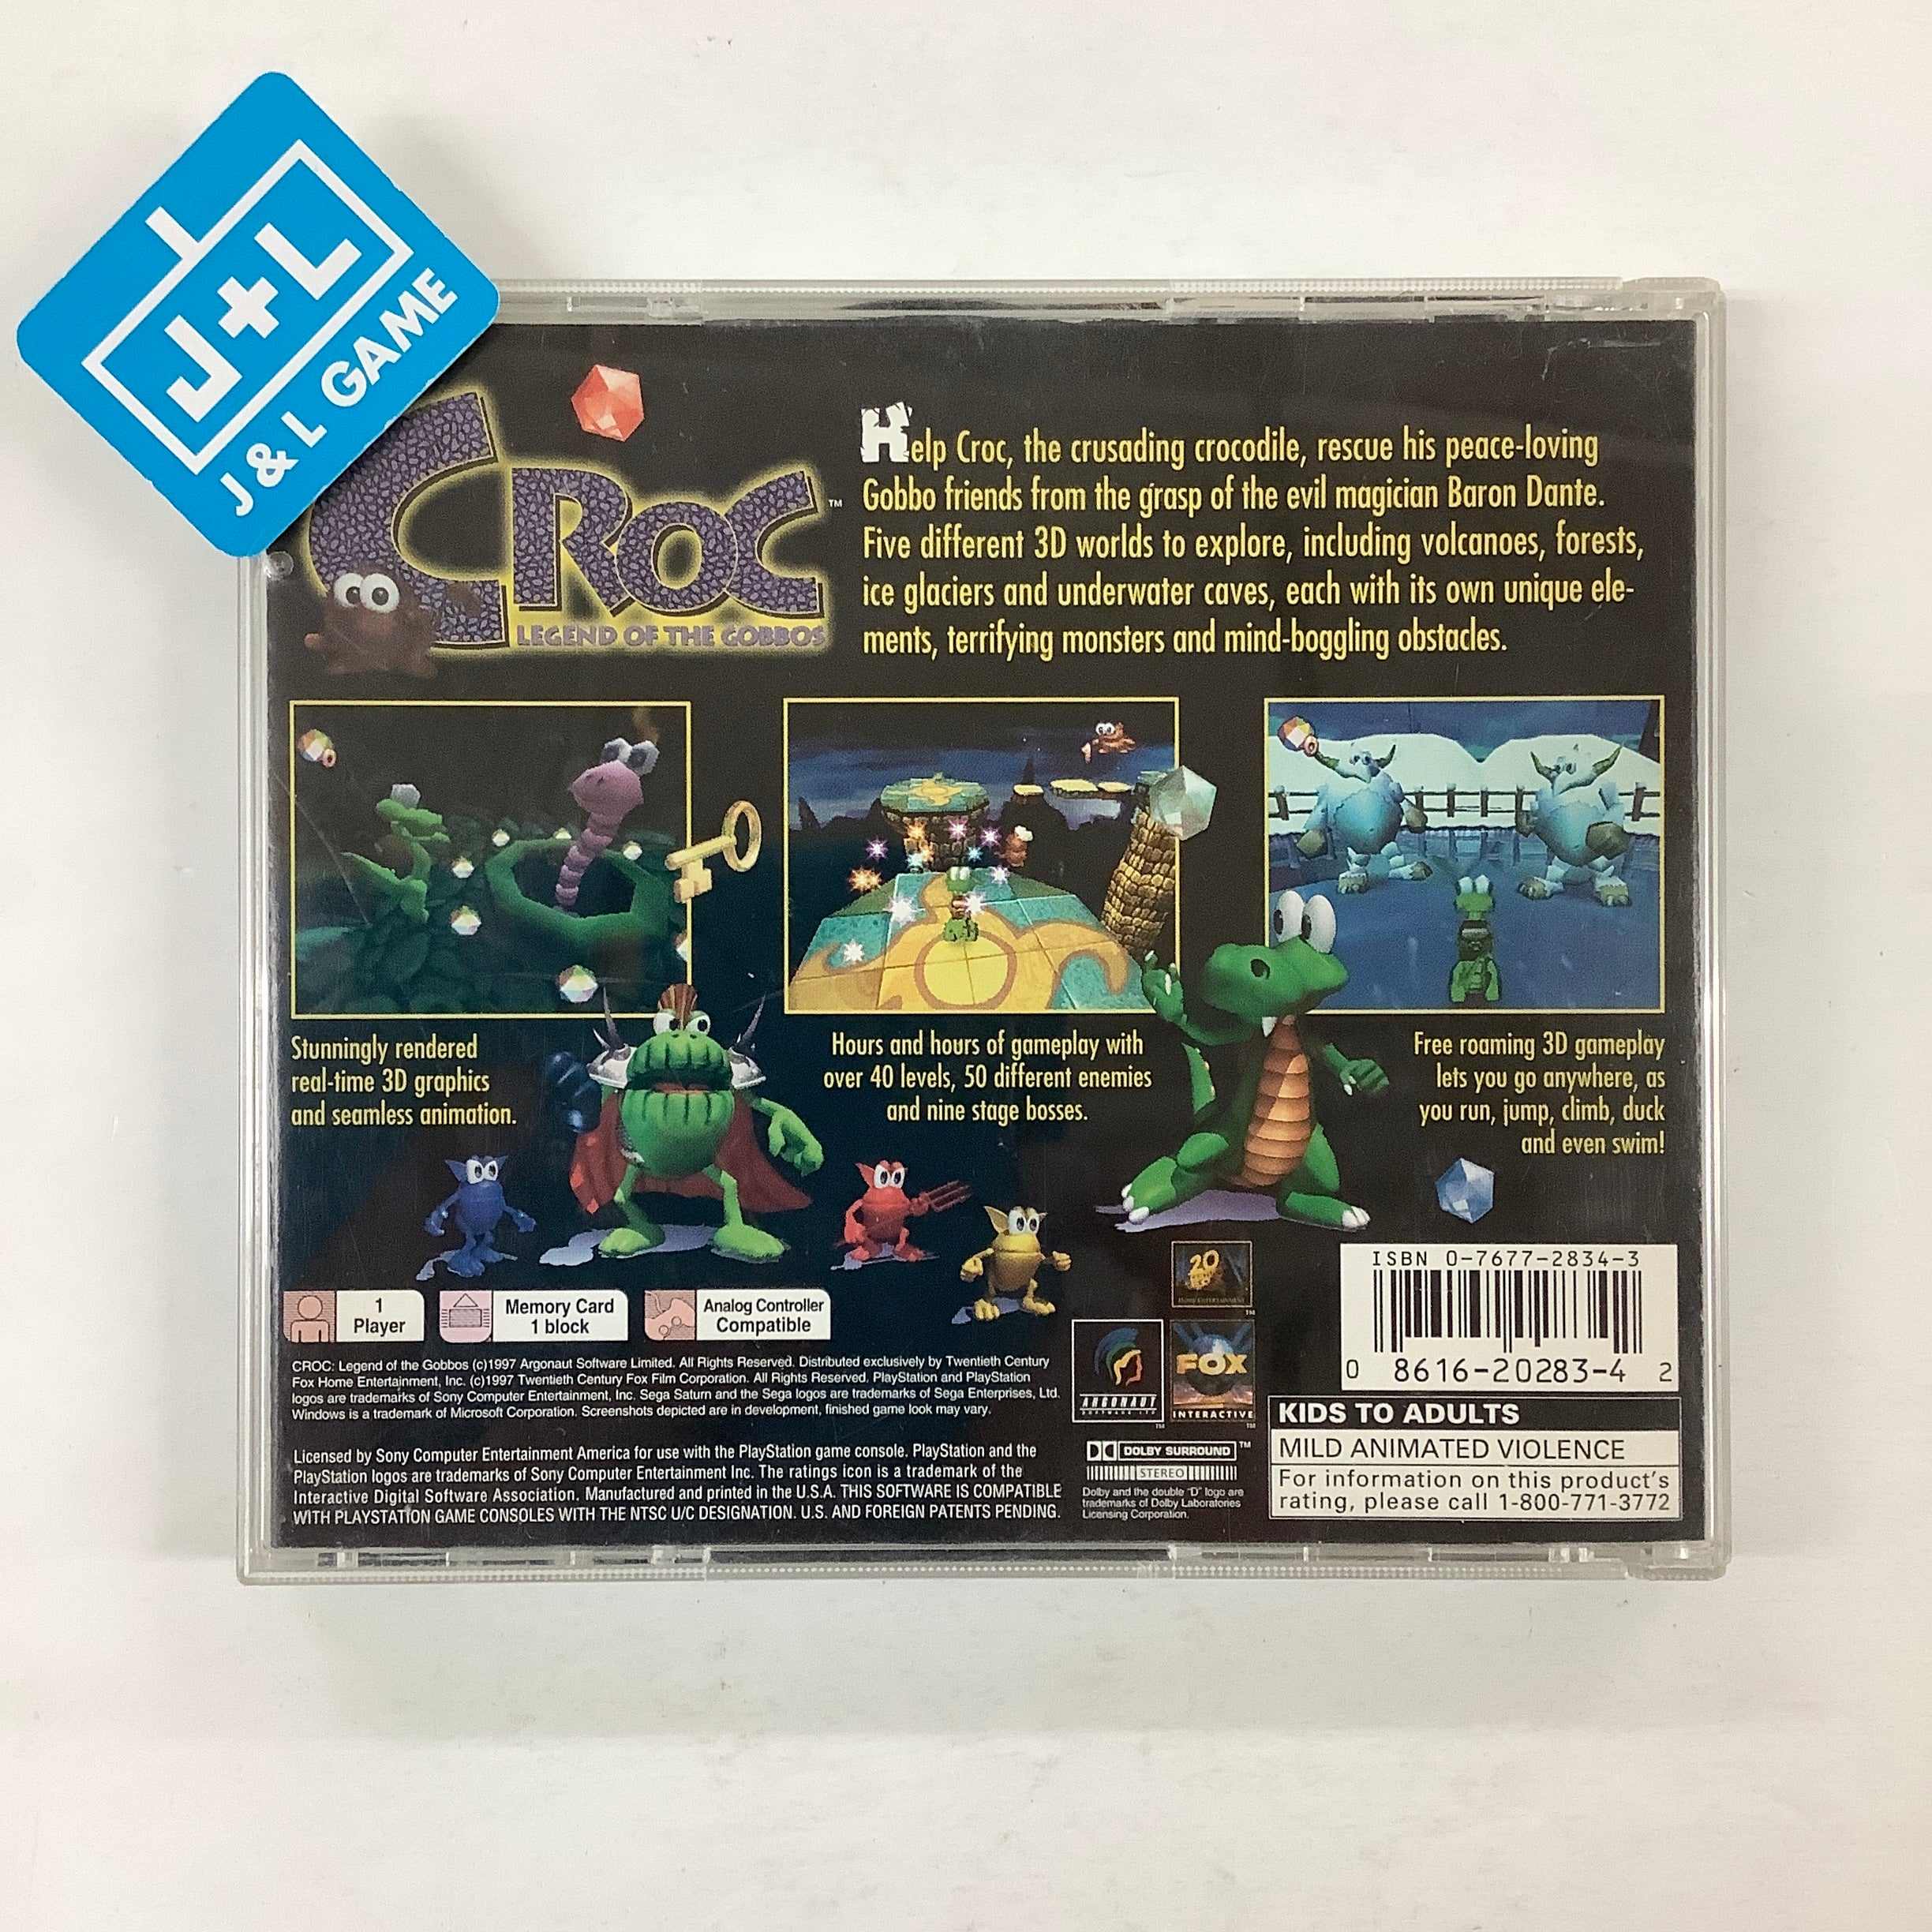 Croc: Legend of the Gobbos - (PS1) PlayStation 1 [Pre-Owned] Video Games Fox Interactive   